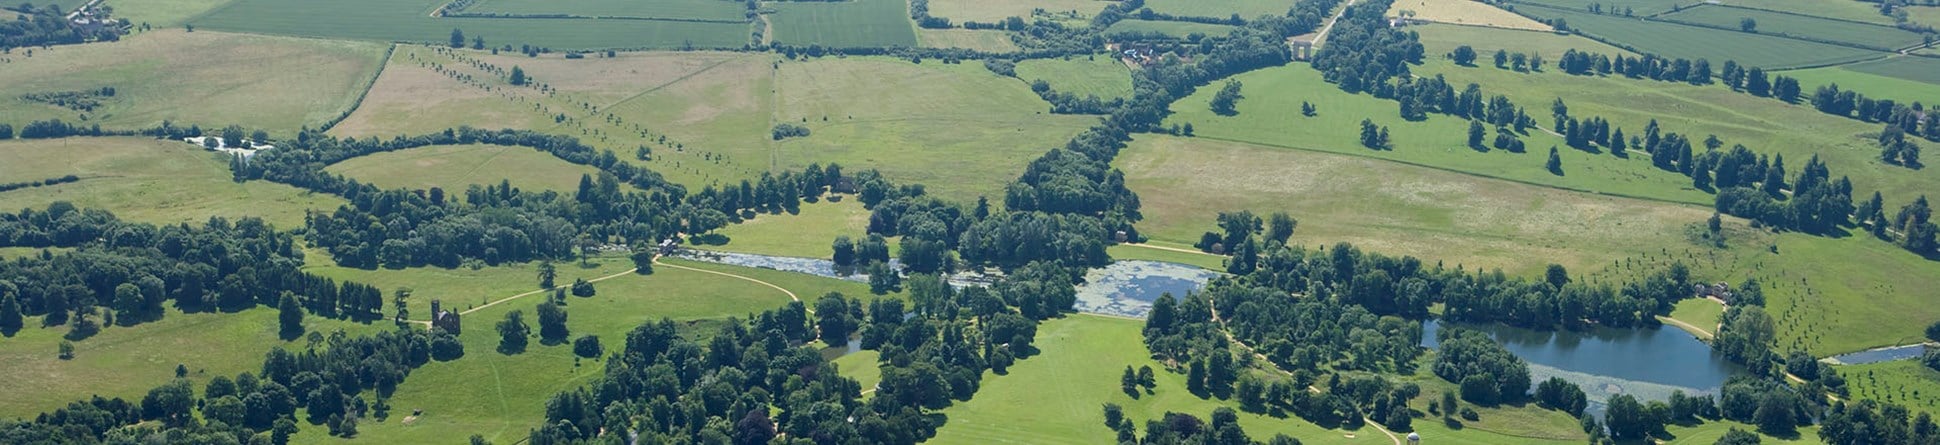 Colour aerial photo showing an ornamental lake surrounded by parkland and trees with arable fields beyond.